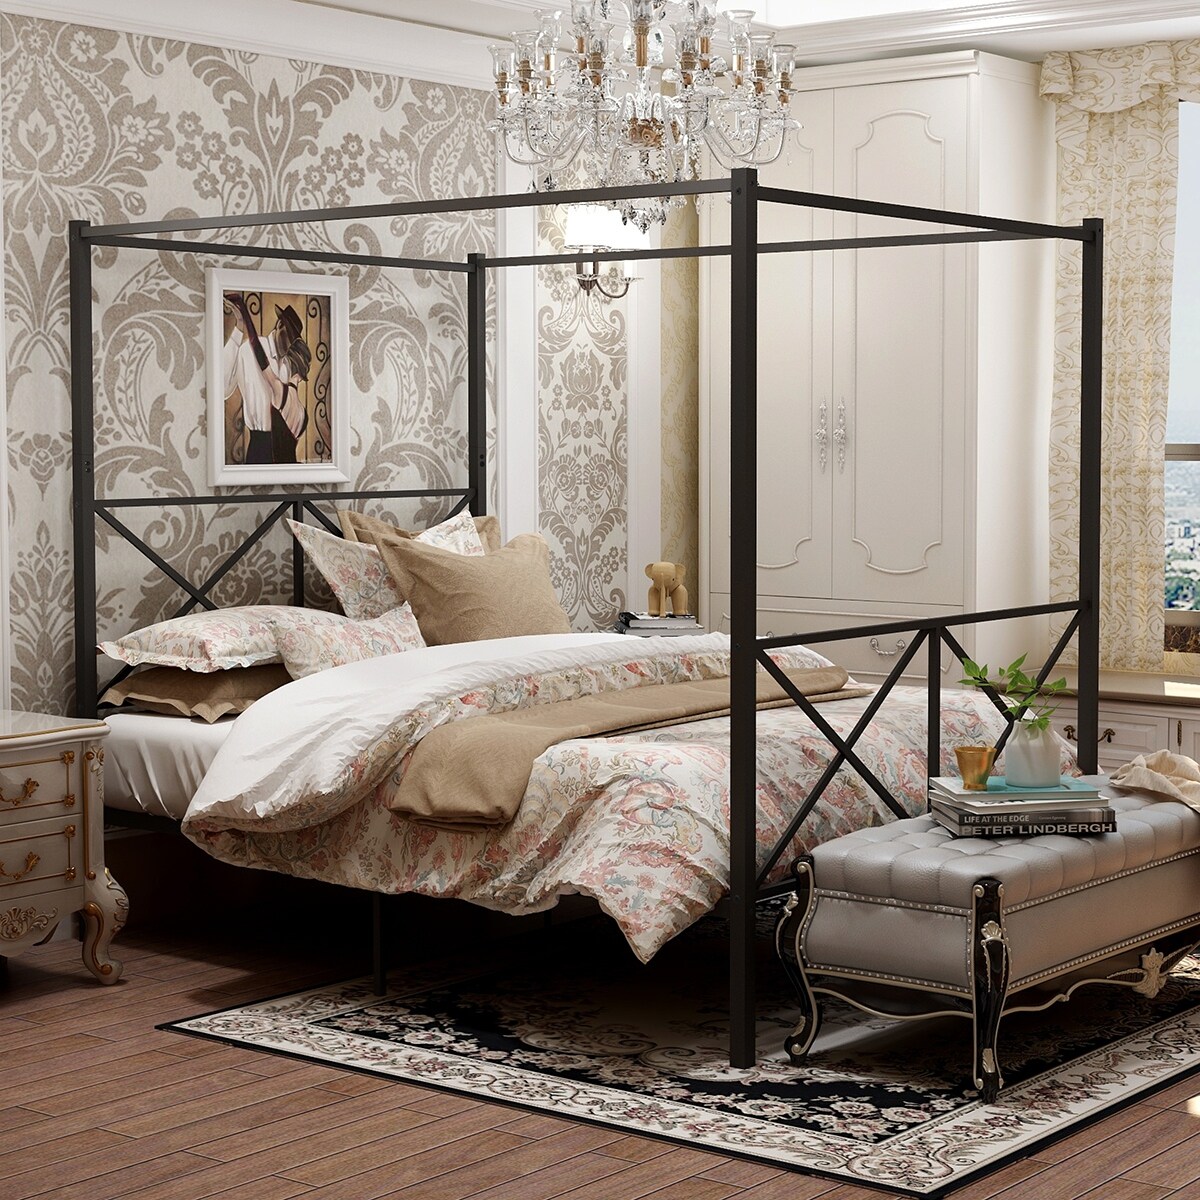 Twin Metal Canopy Bed Frame  Twin Platform Bed With X-shaped Frame  Black